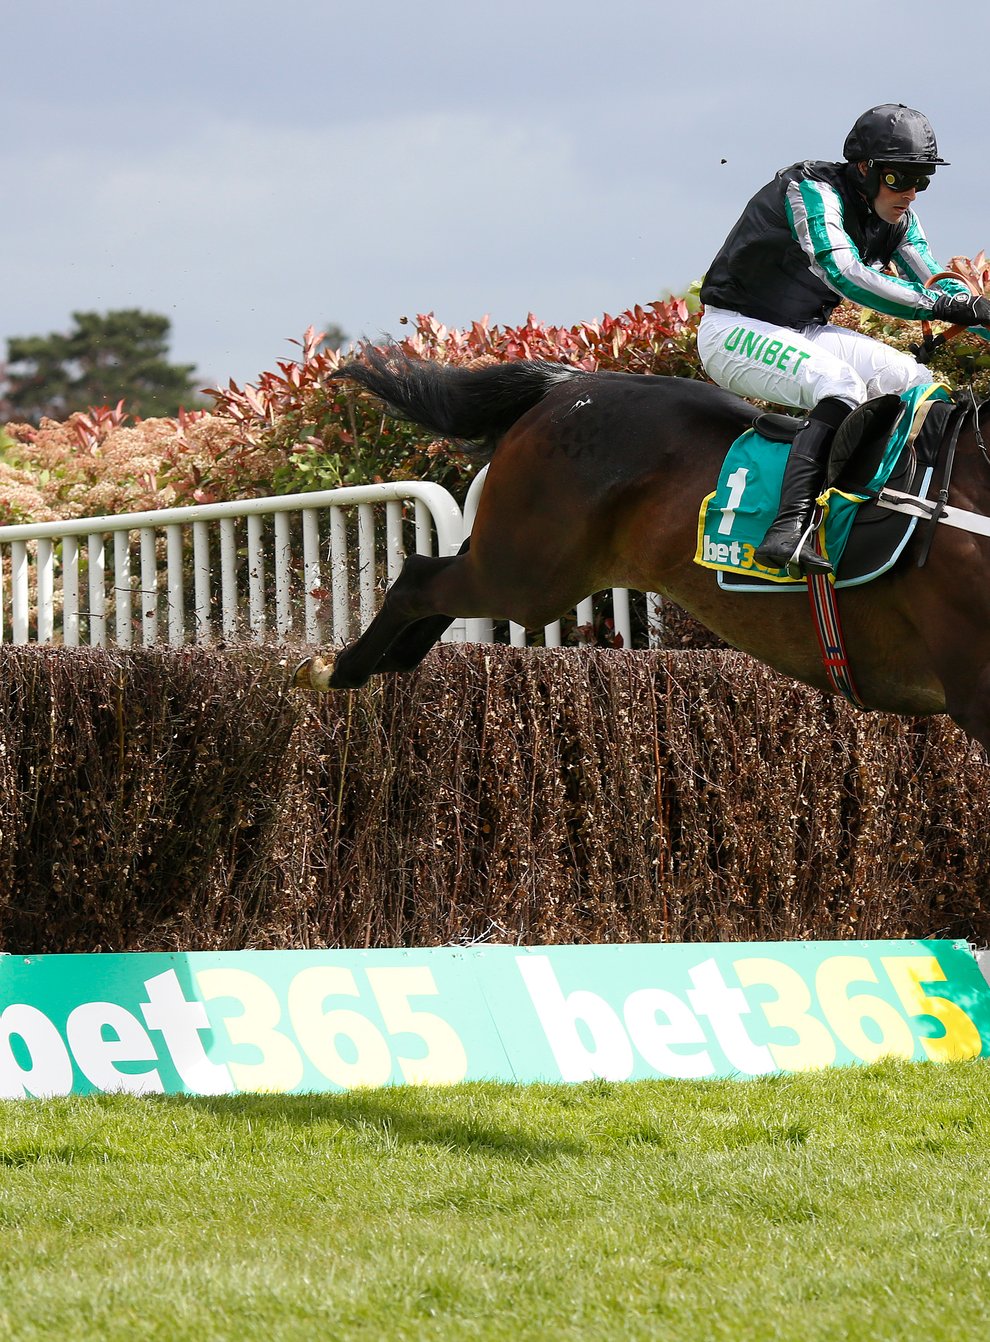 Dual Queen Mother Champion Chase winner Altior is among the entries for this year's renewal